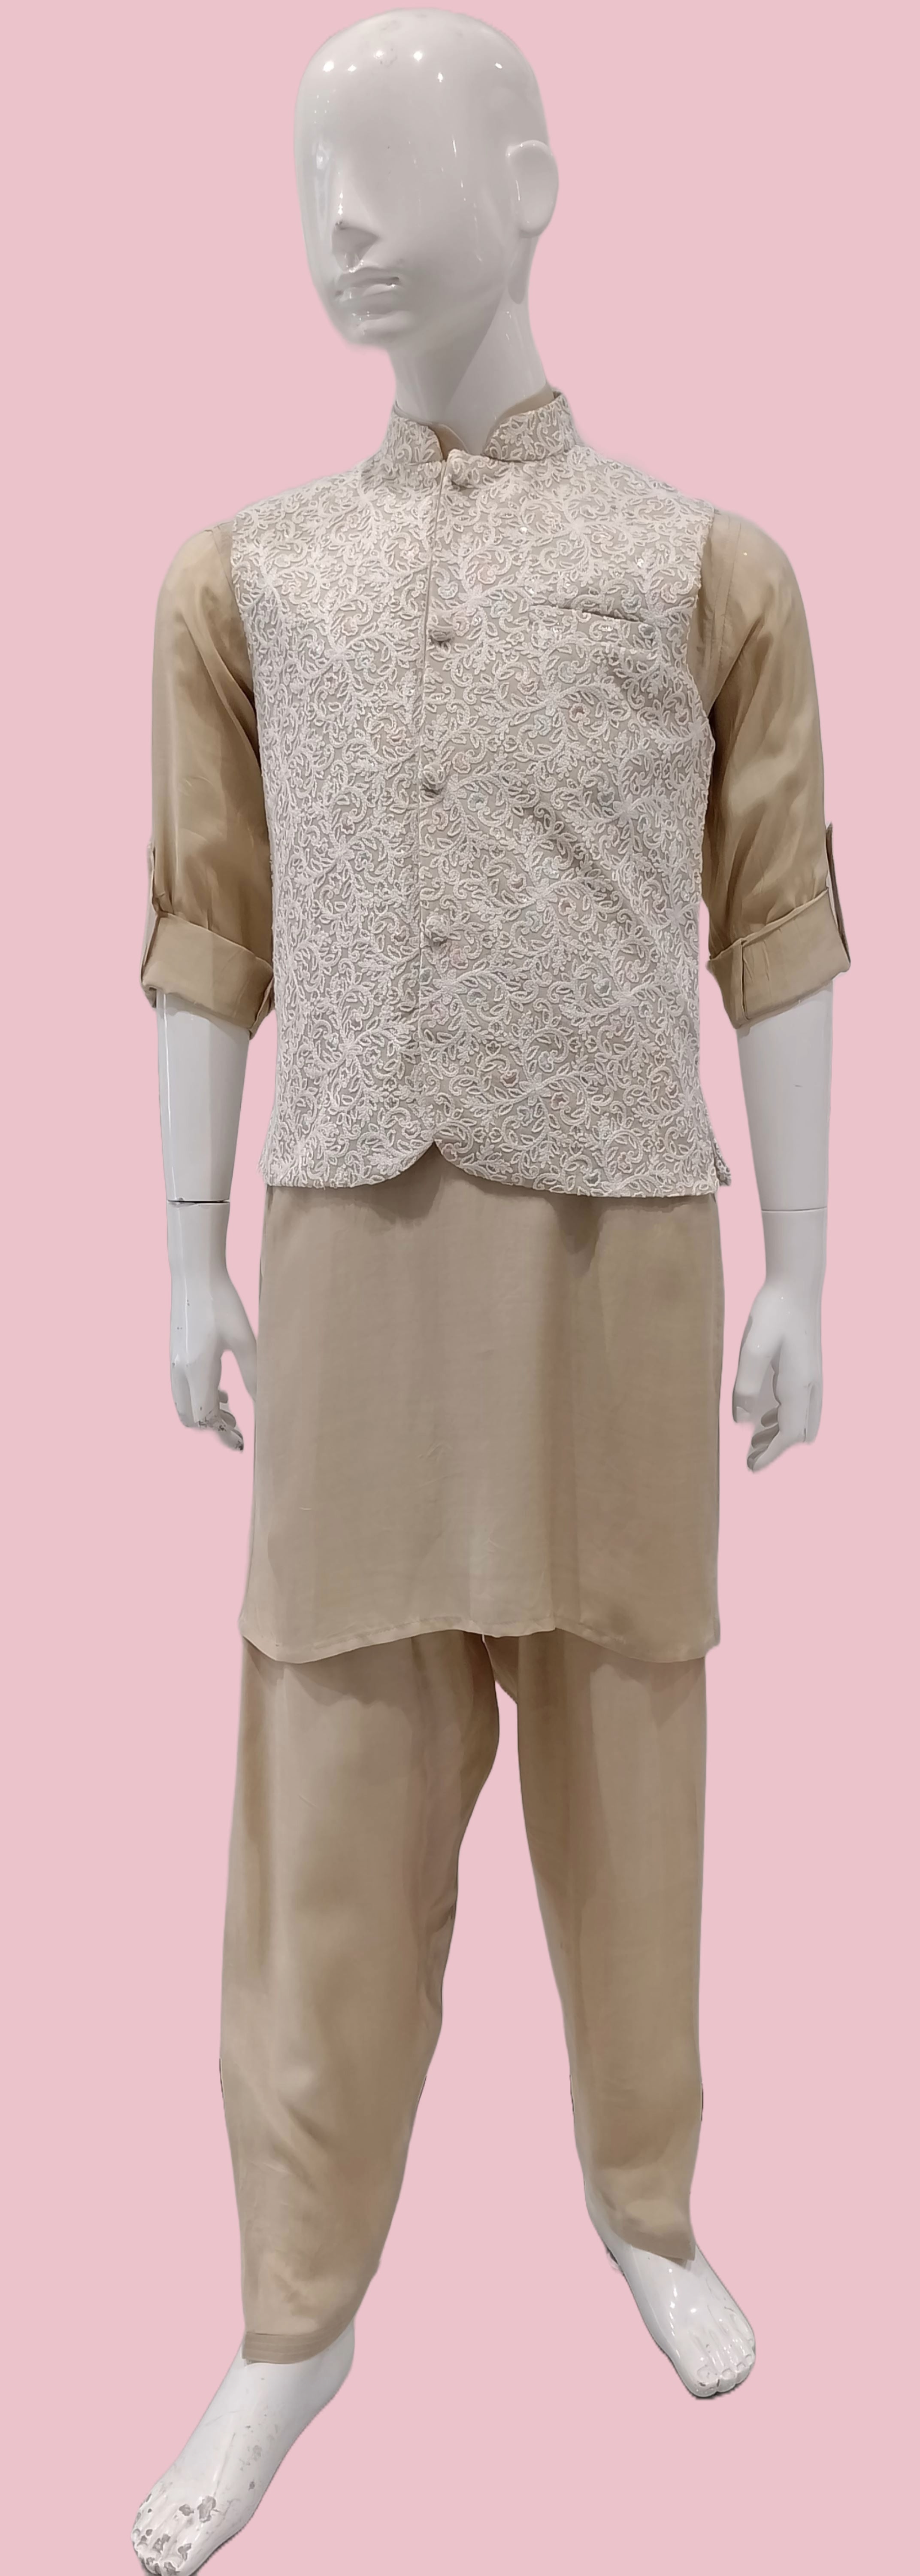 Boys Ethnic Wear Fawn Pathani Suit With Jacket